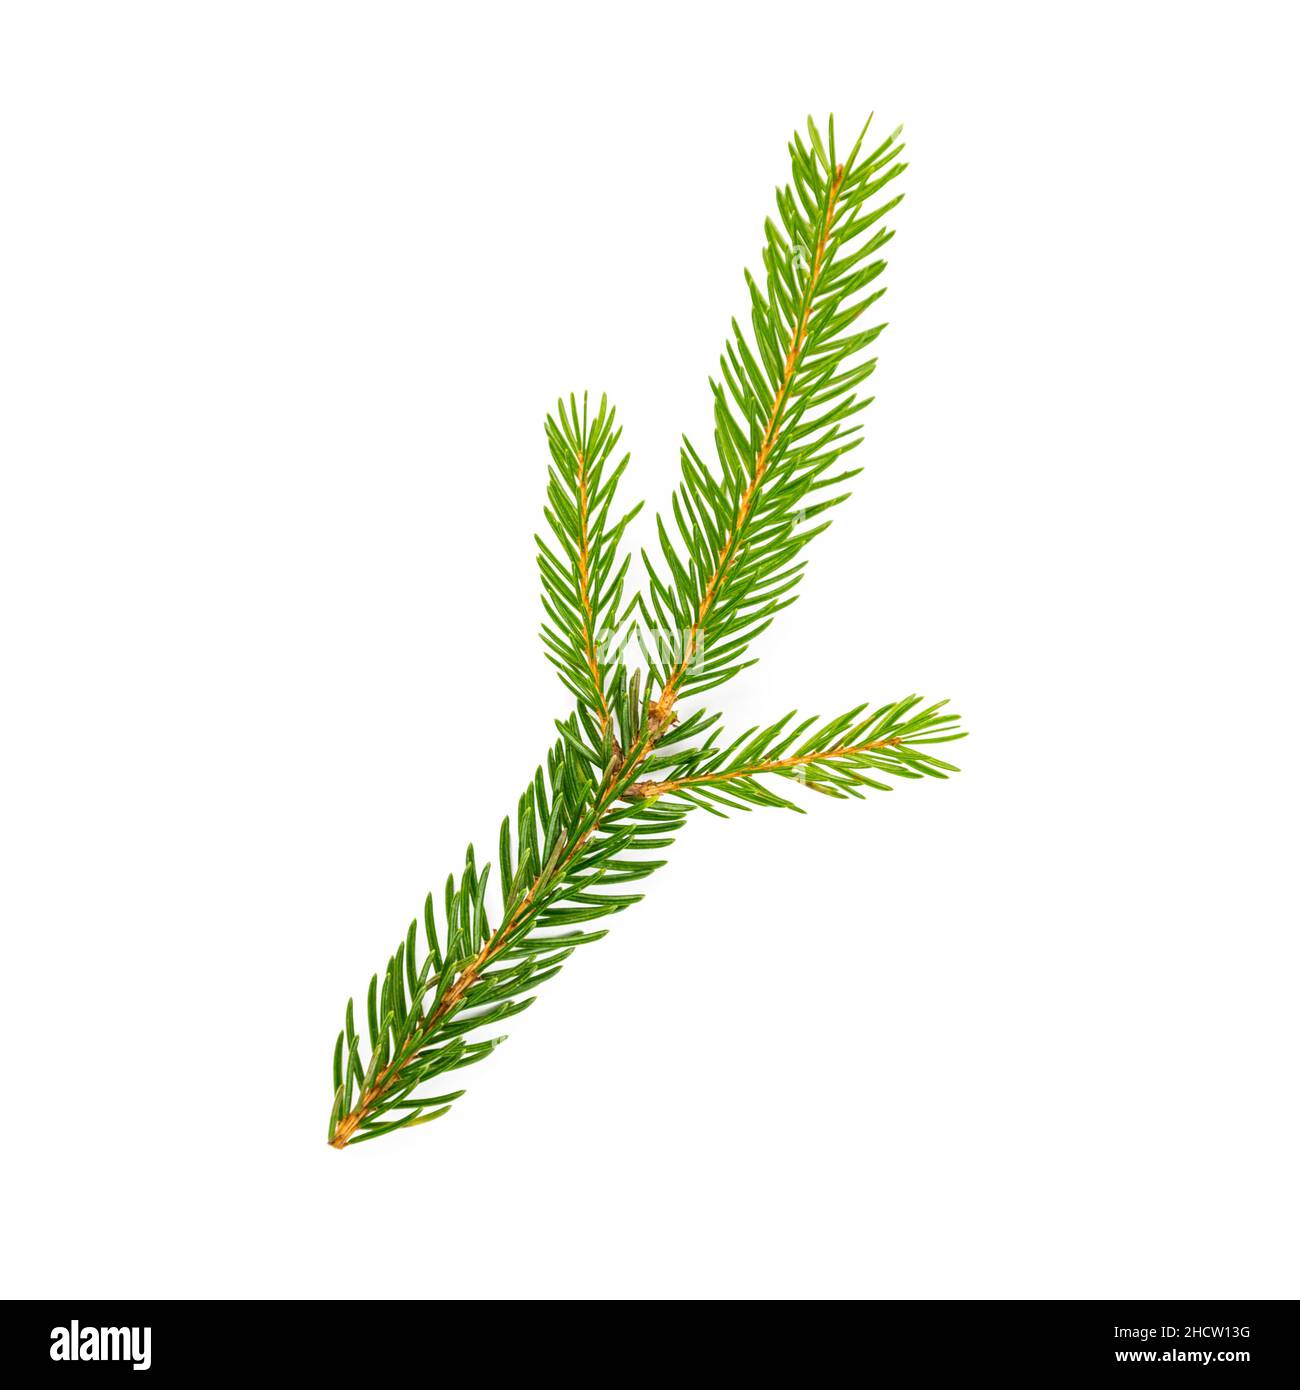 spruce fir tree branch isolated on white background Stock Photo